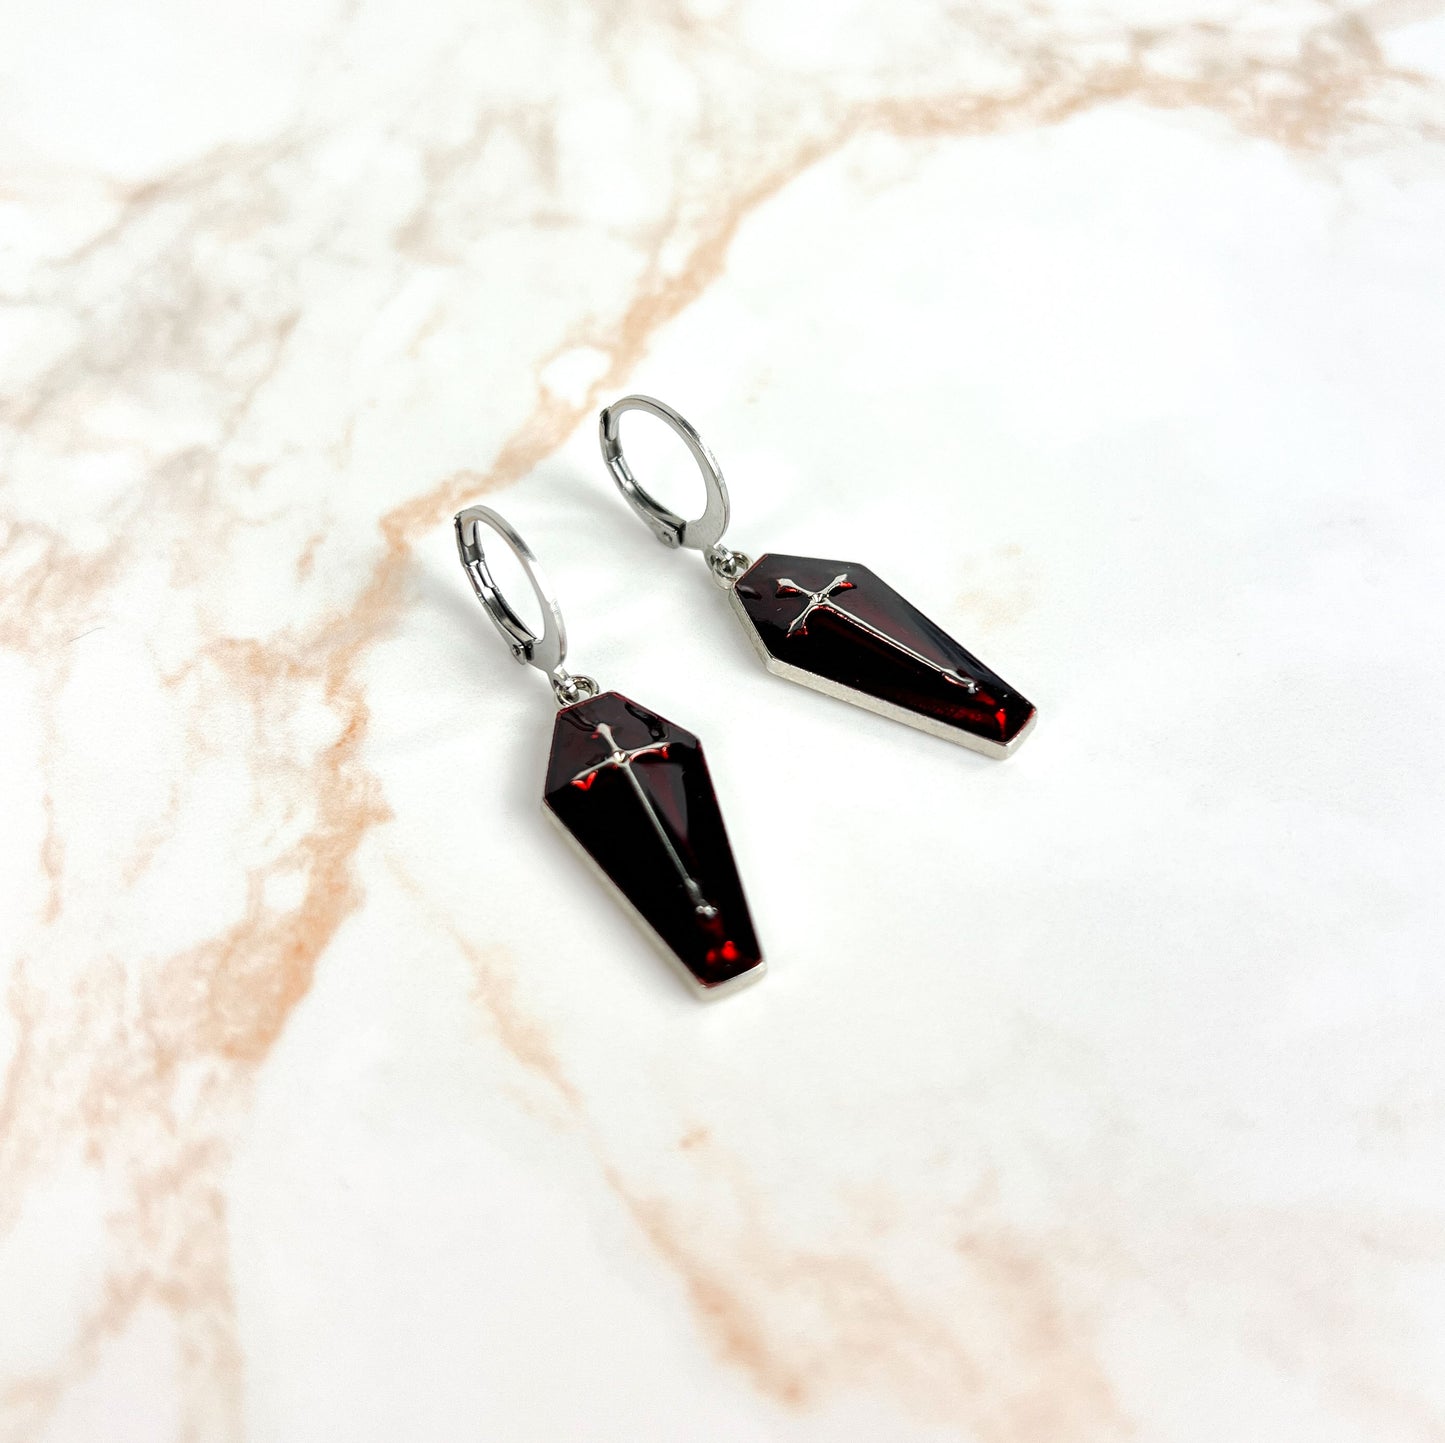 Coffin earrings pair of gothic enameled coffins witchy jewelry creepy earrings with stainless steel closures Halloween jewelry